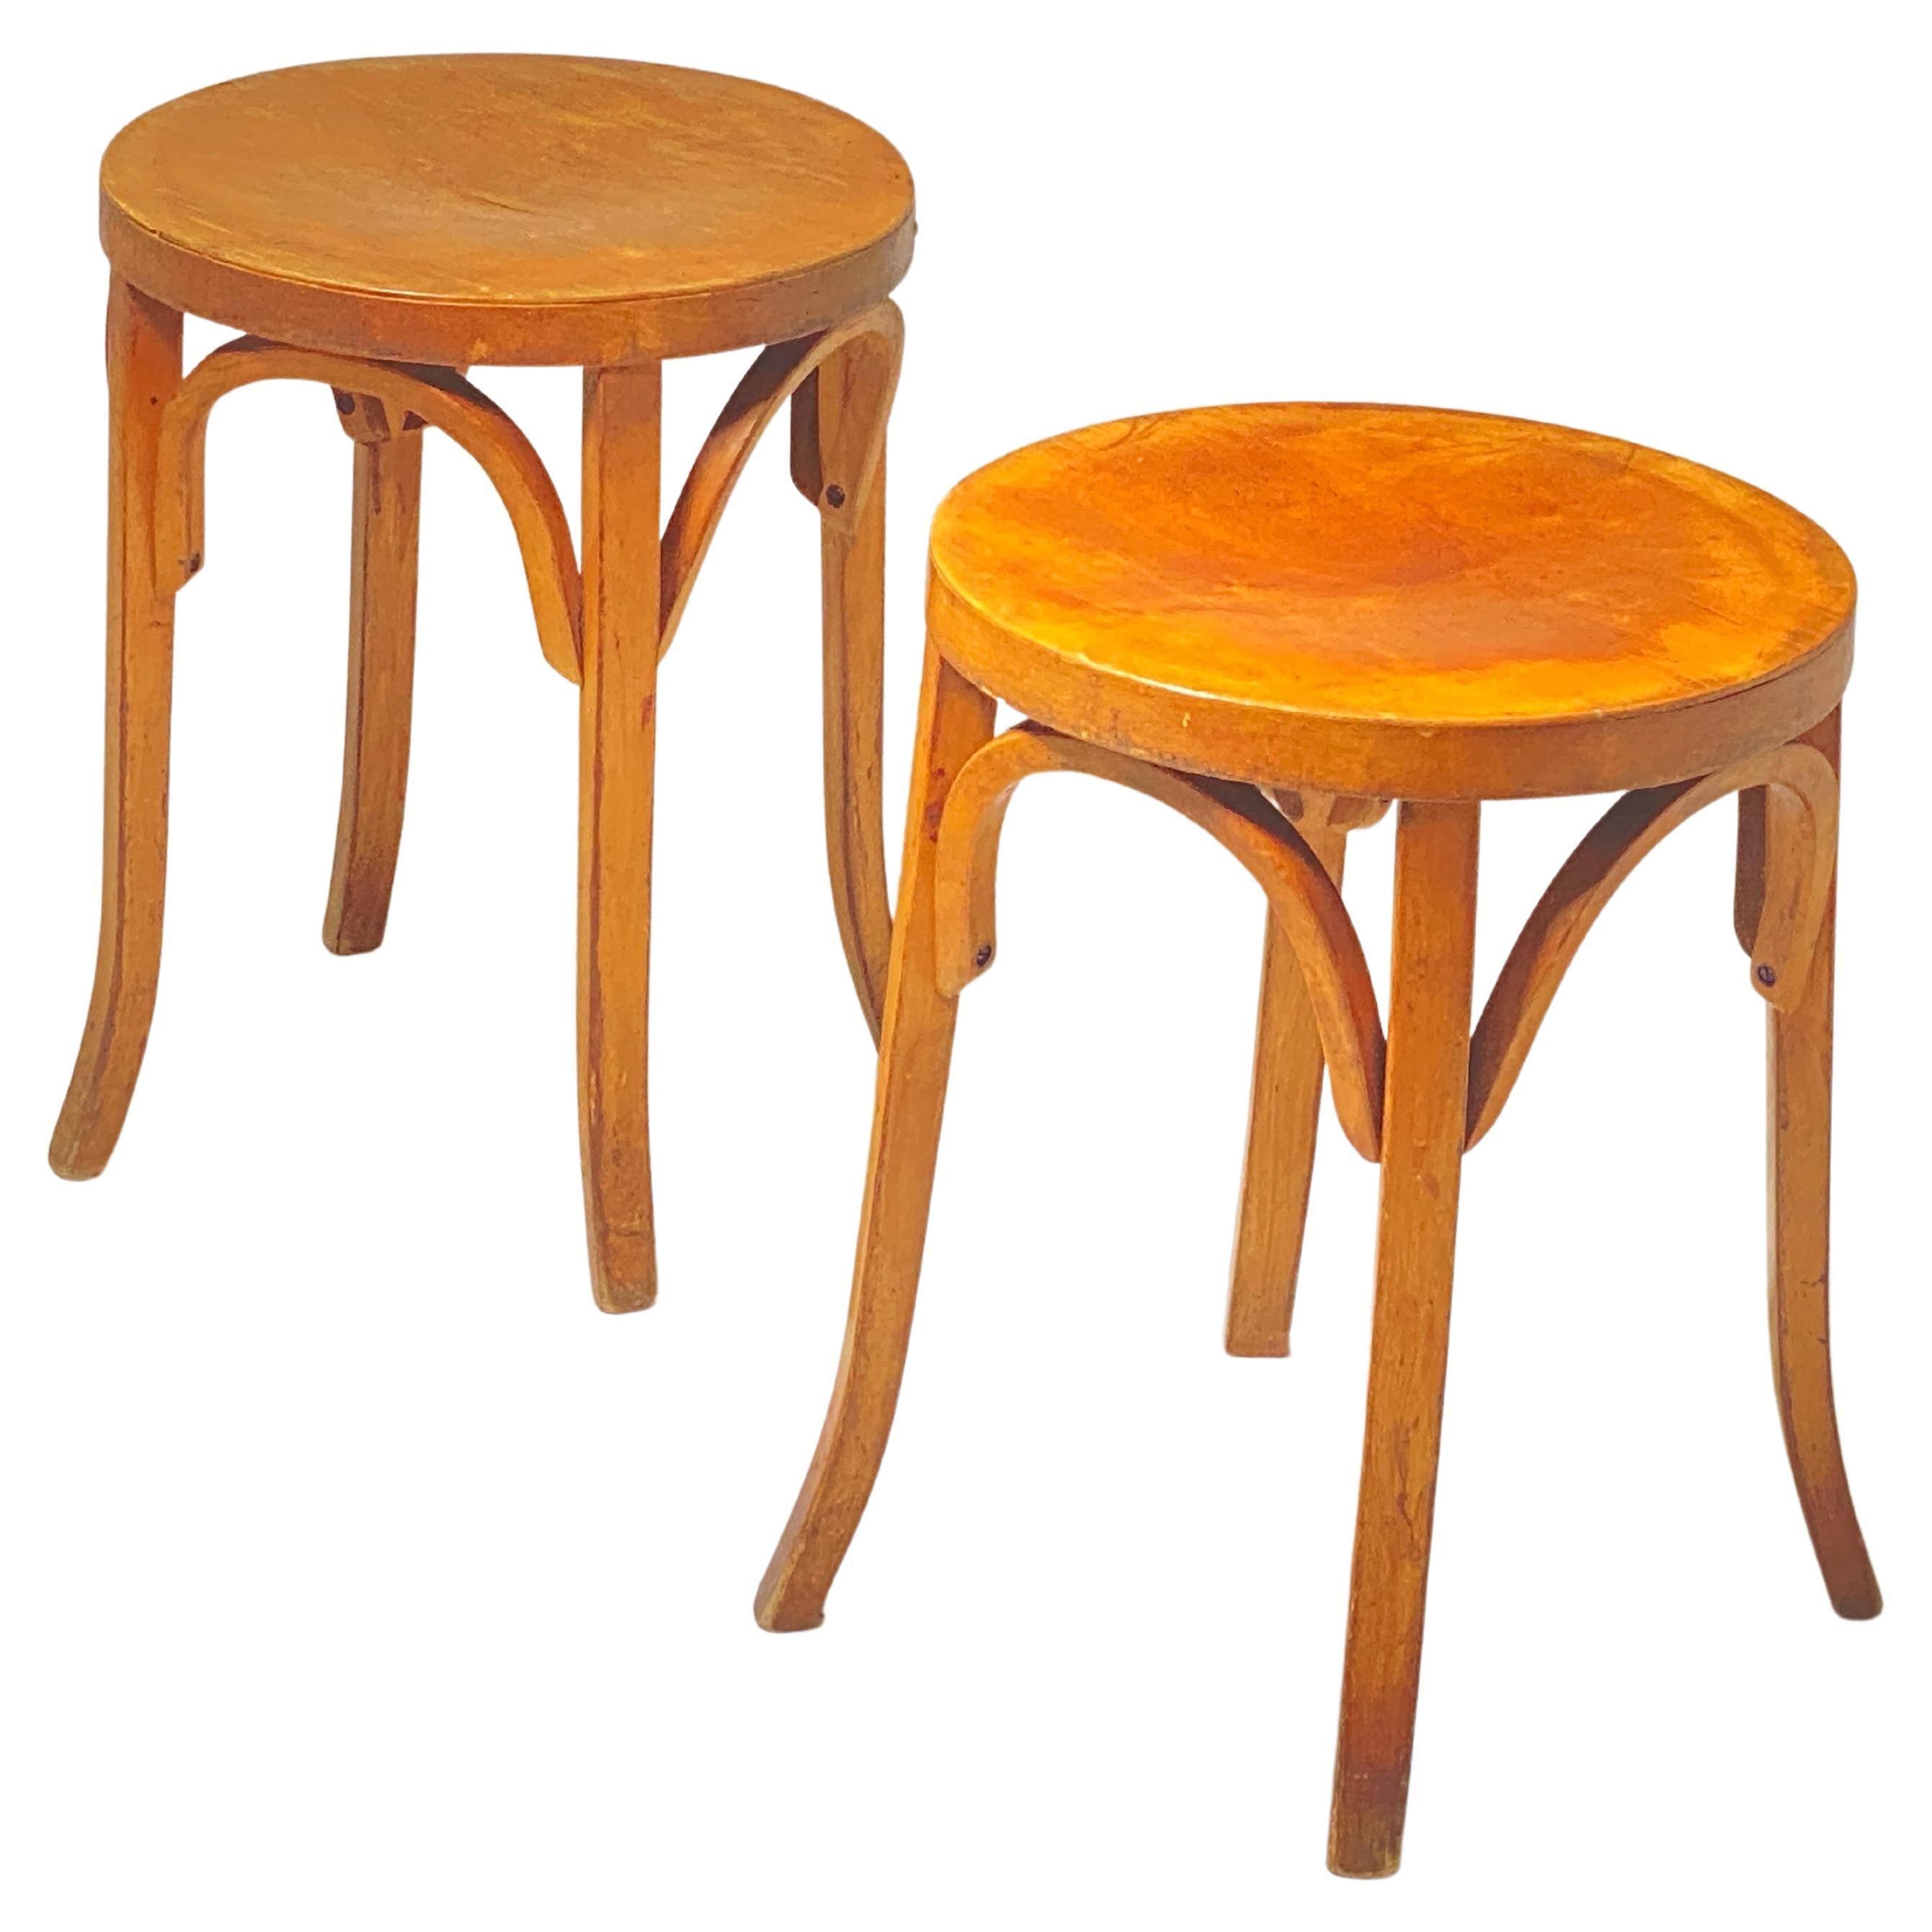 Stools in Wood, Old Patina, in the Style of Thonet, 1920 Austria, Set of 2